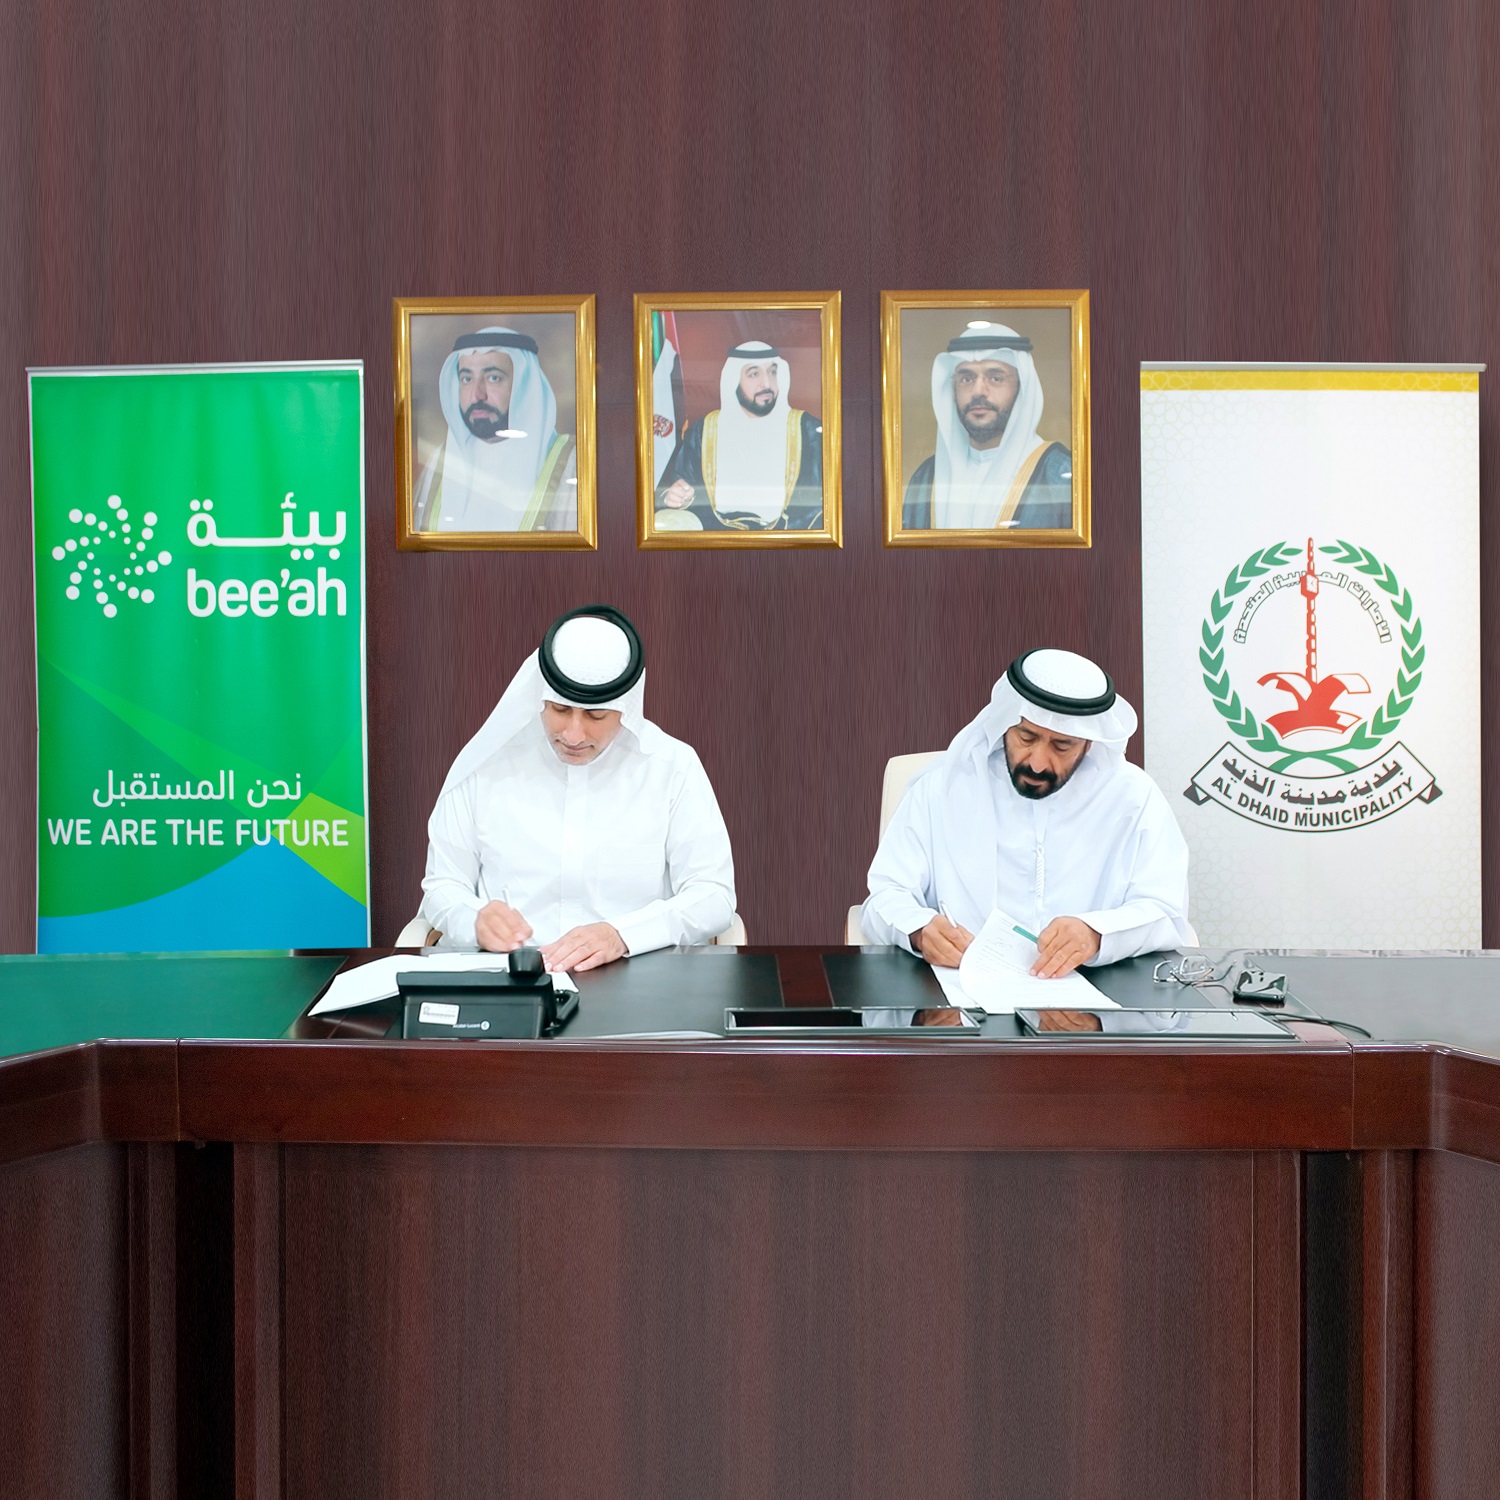 Al Dhaid Municipality Appoints Bee’ah To Enhance City Cleaning And Waste Management